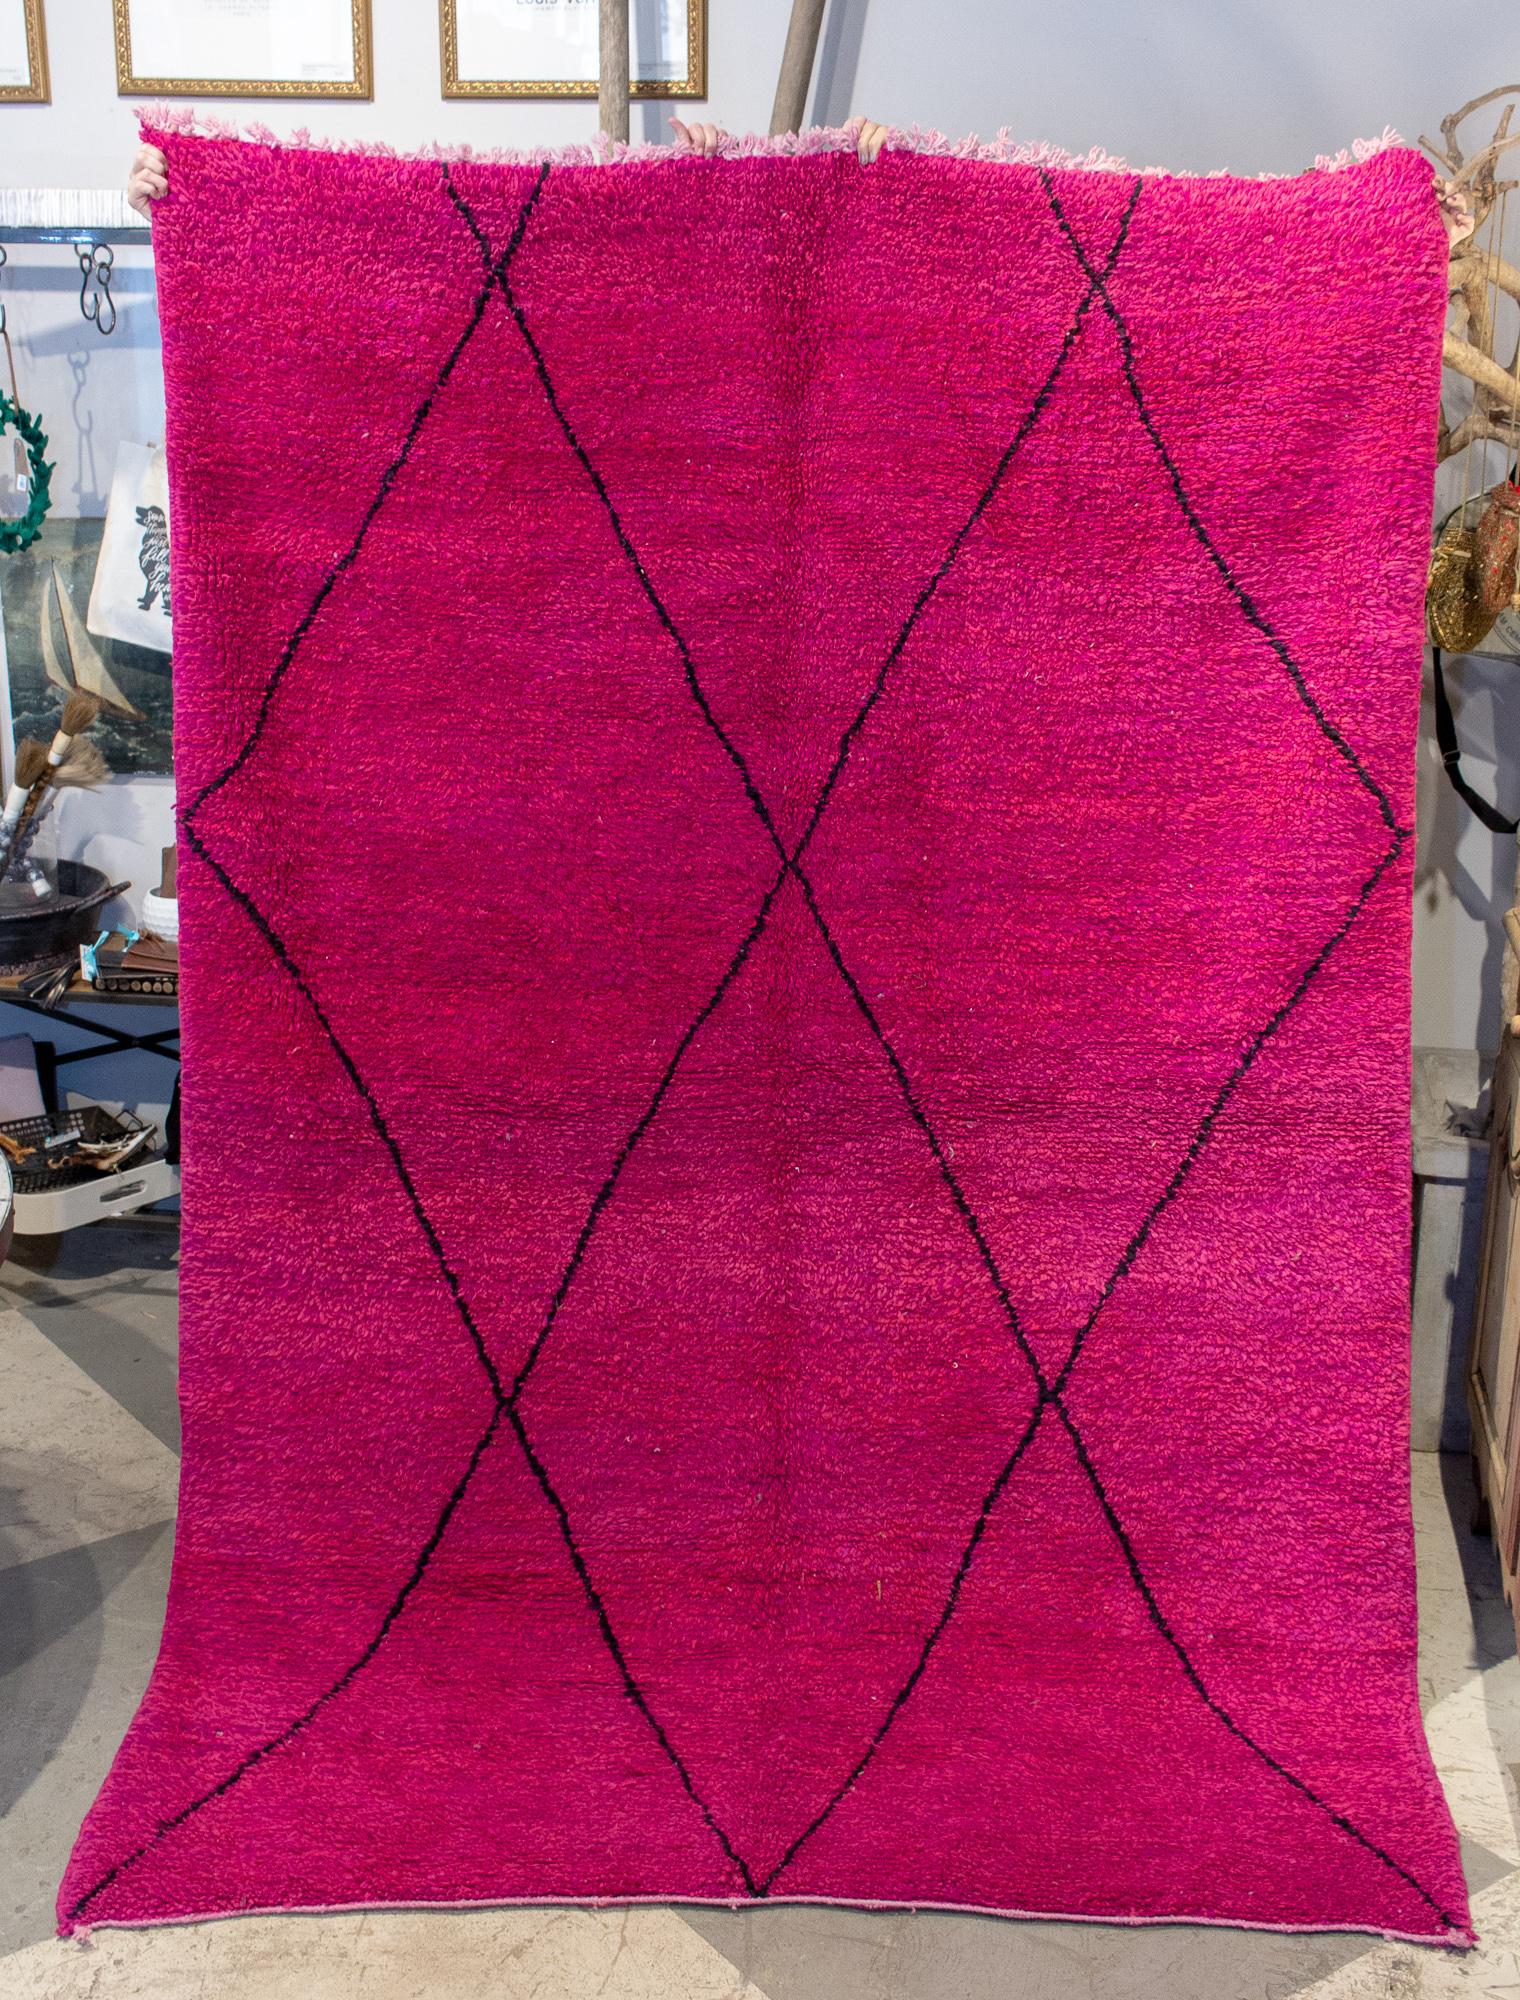 This is a Moroccan Beni Ourain Berber rug sourced in Marrakech. This rug features a hot pink and fuchsia background with black-diamond patterning, as is typical of these rugs. This rug is handmade and features two sides, one flat-woven side for